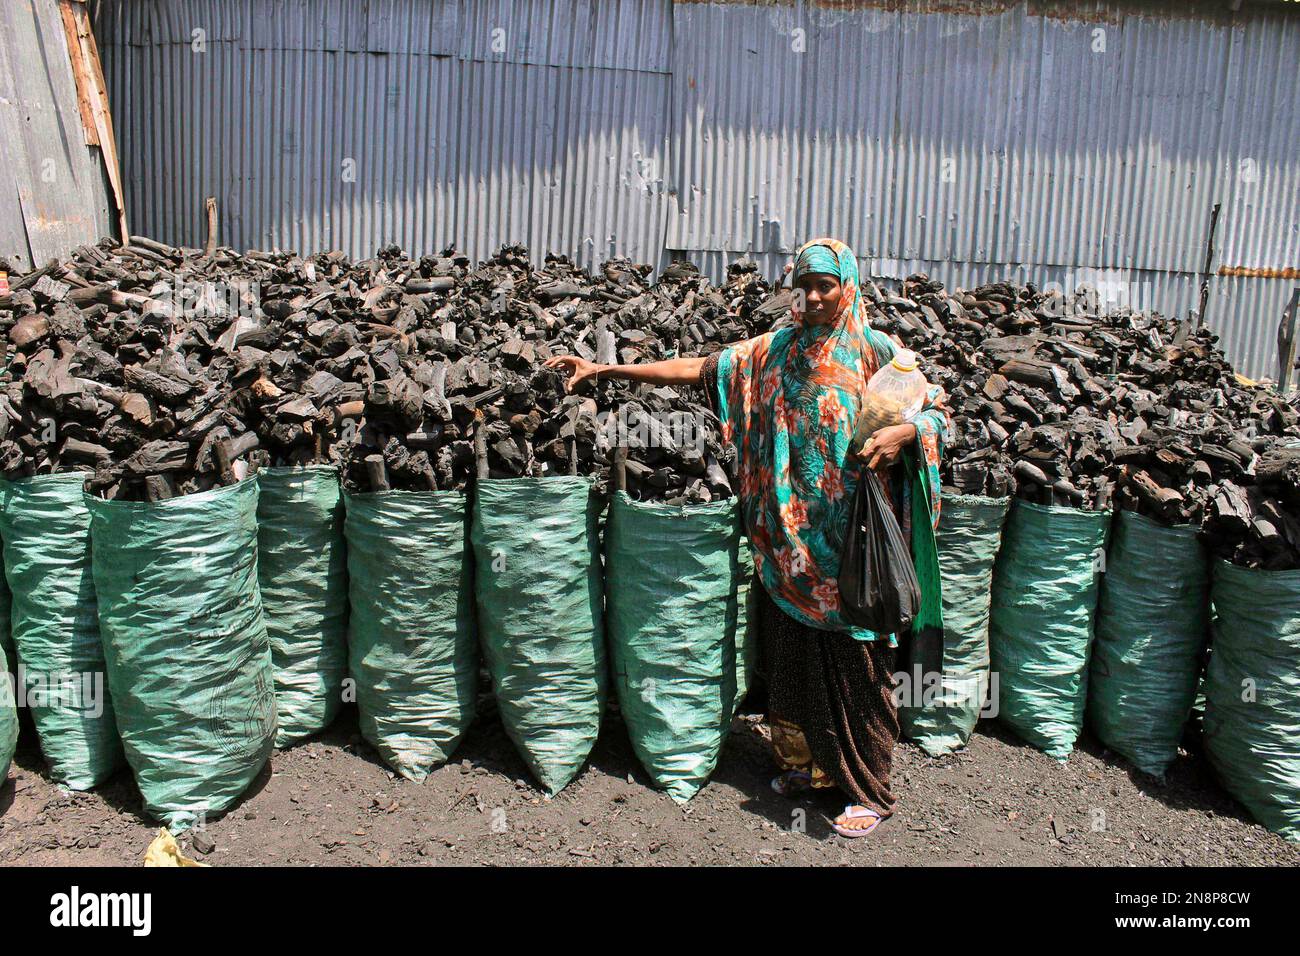 In this photo of Tuesday Oct. 30, 2012, A Somali charcoal trader scales charcoal at his charcoal shop in Mogadishu, Somali. Thousands of sacks of dark charcoal sit atop one another in Somalia's southern port city of Kismayo, an industry once worth some $25 million dollar a year to the al-Qaida-linked insurgents who controlled the region. The good news sitting in the idle pile of sacks is that al-Shabab militants can no longer fund their insurgency through the illegal export of the charcoal. Kenyan troops late last month invaded Kismayo and forced out the insurgents, putting a halt to the expor Stock Photo